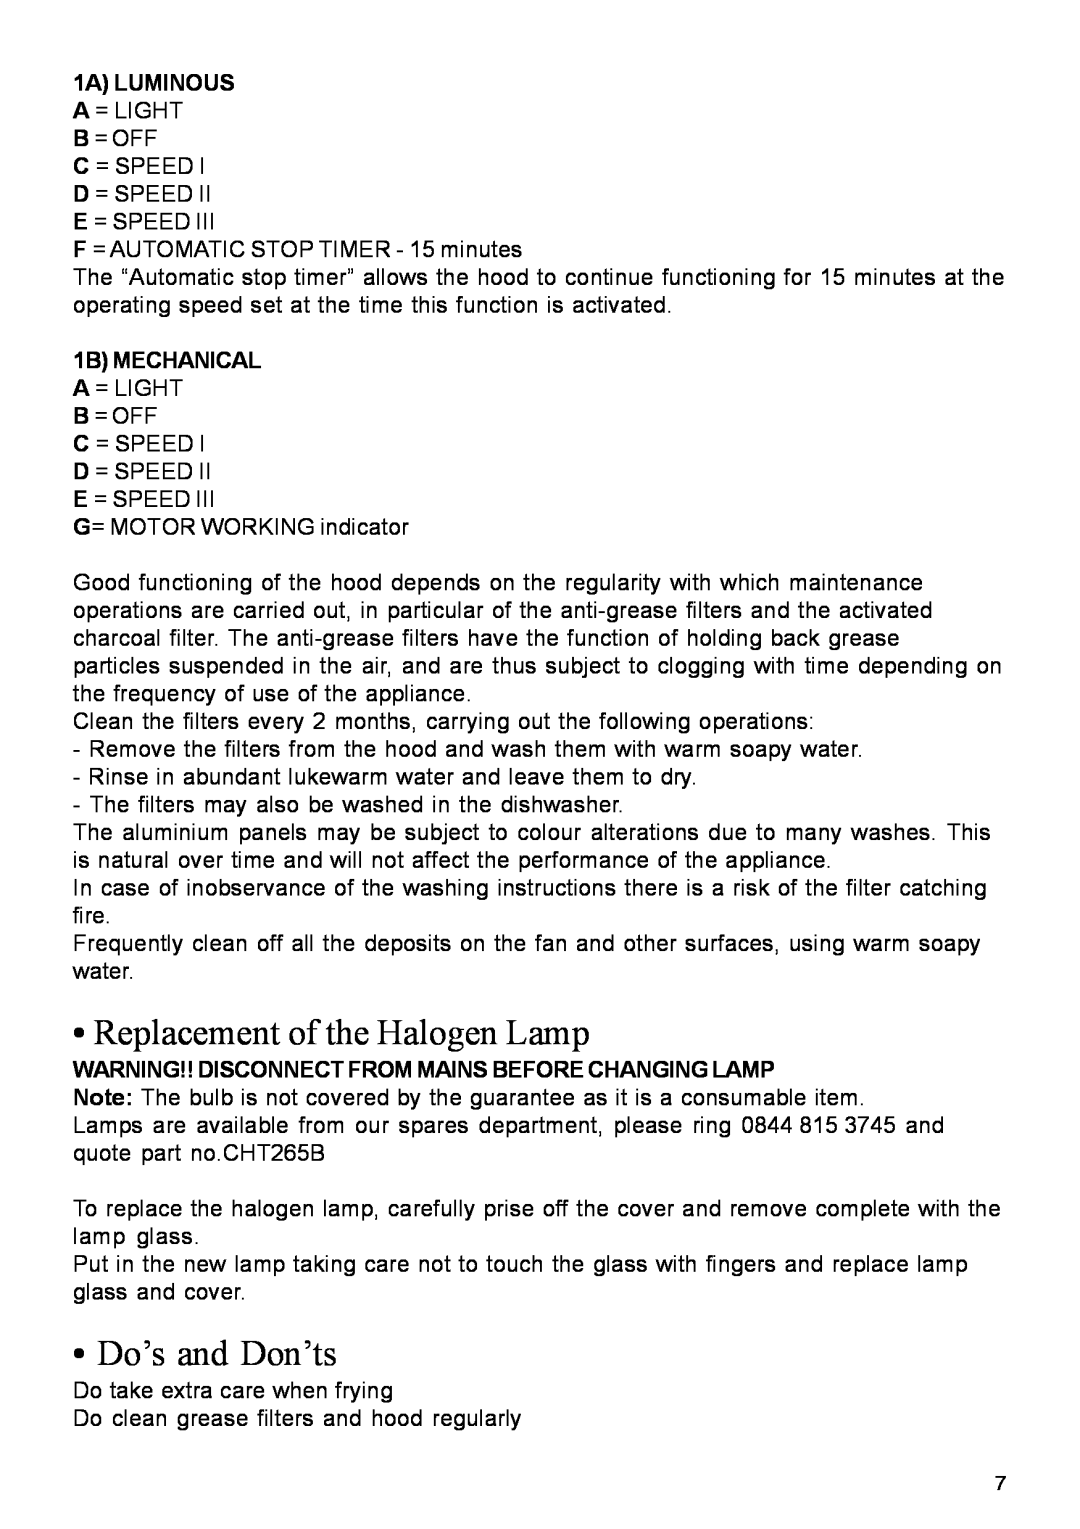 Glen Dimplex Home Appliances Ltd DIH900 manual •Replacement of the Halogen Lamp, •Do’s and Don’ts, 1A LUMINOUS A = LIGHT 